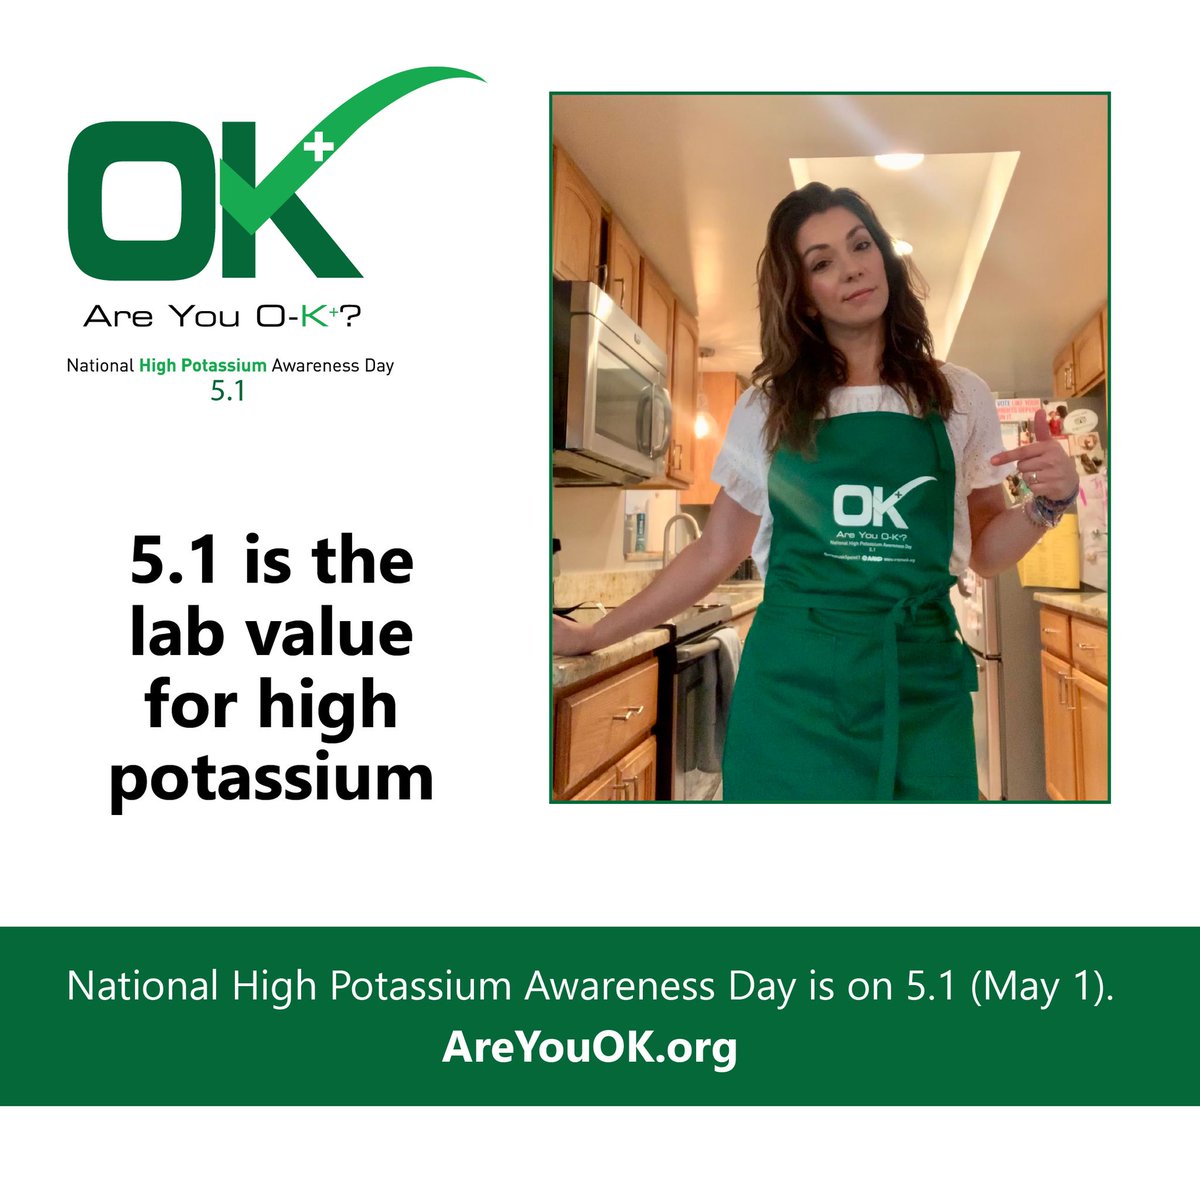 Did you know that a lab value of 5.1 indicates the onset of high potassium? That's why on May 1, we observe High Potassium Awareness Day, raising awareness about the condition & its management. For insights into managing hyperkalemia, explore our module at shorturl.at/wGX39